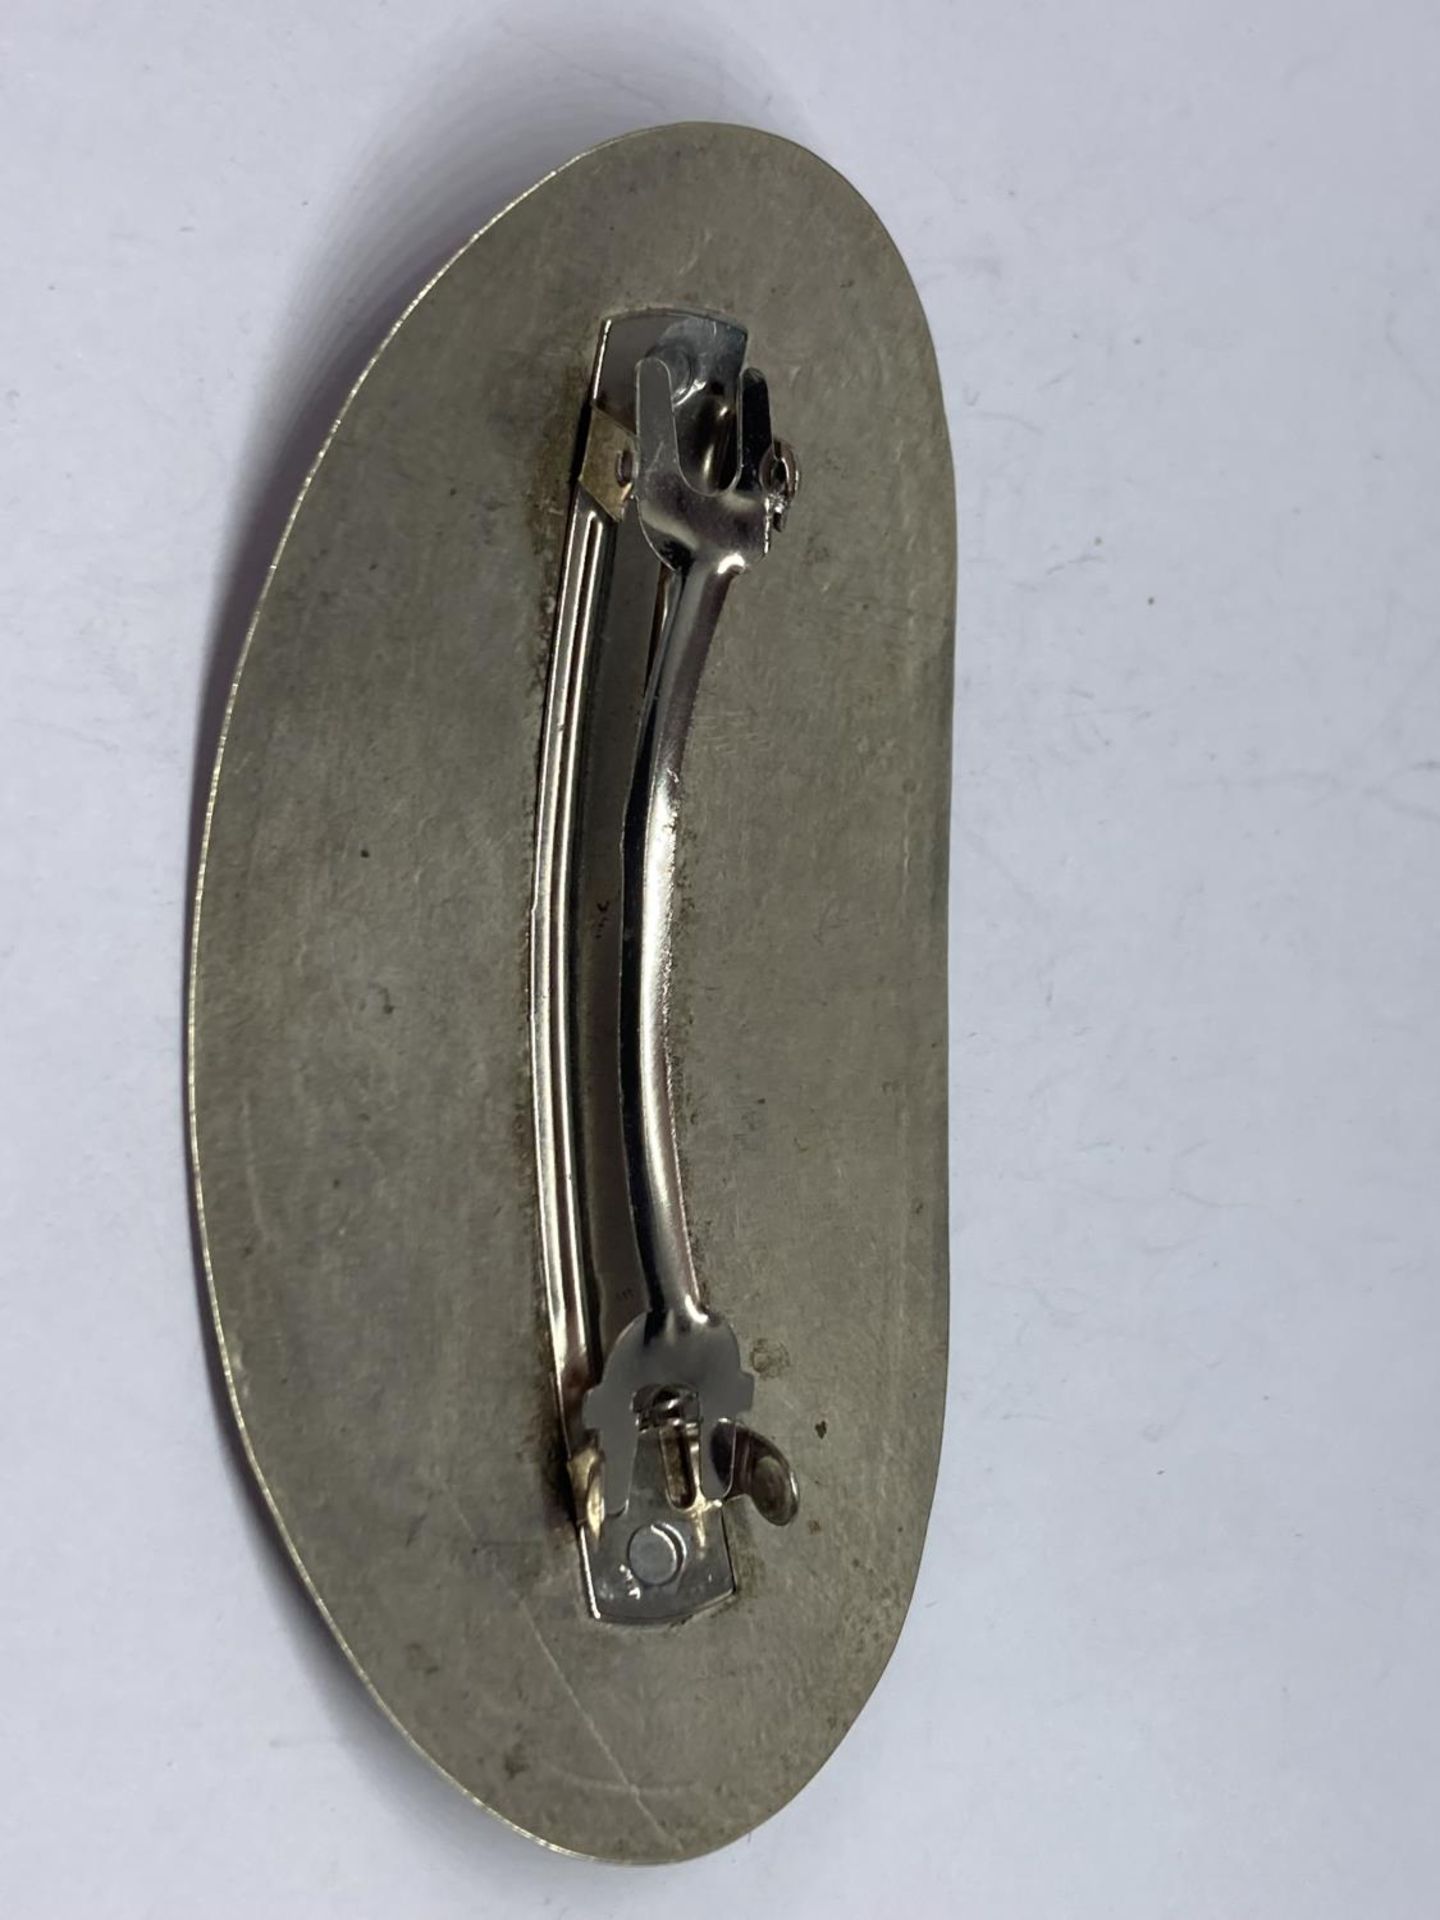 A LOW GRADE SILVER HAIR CLIP - Image 3 of 3